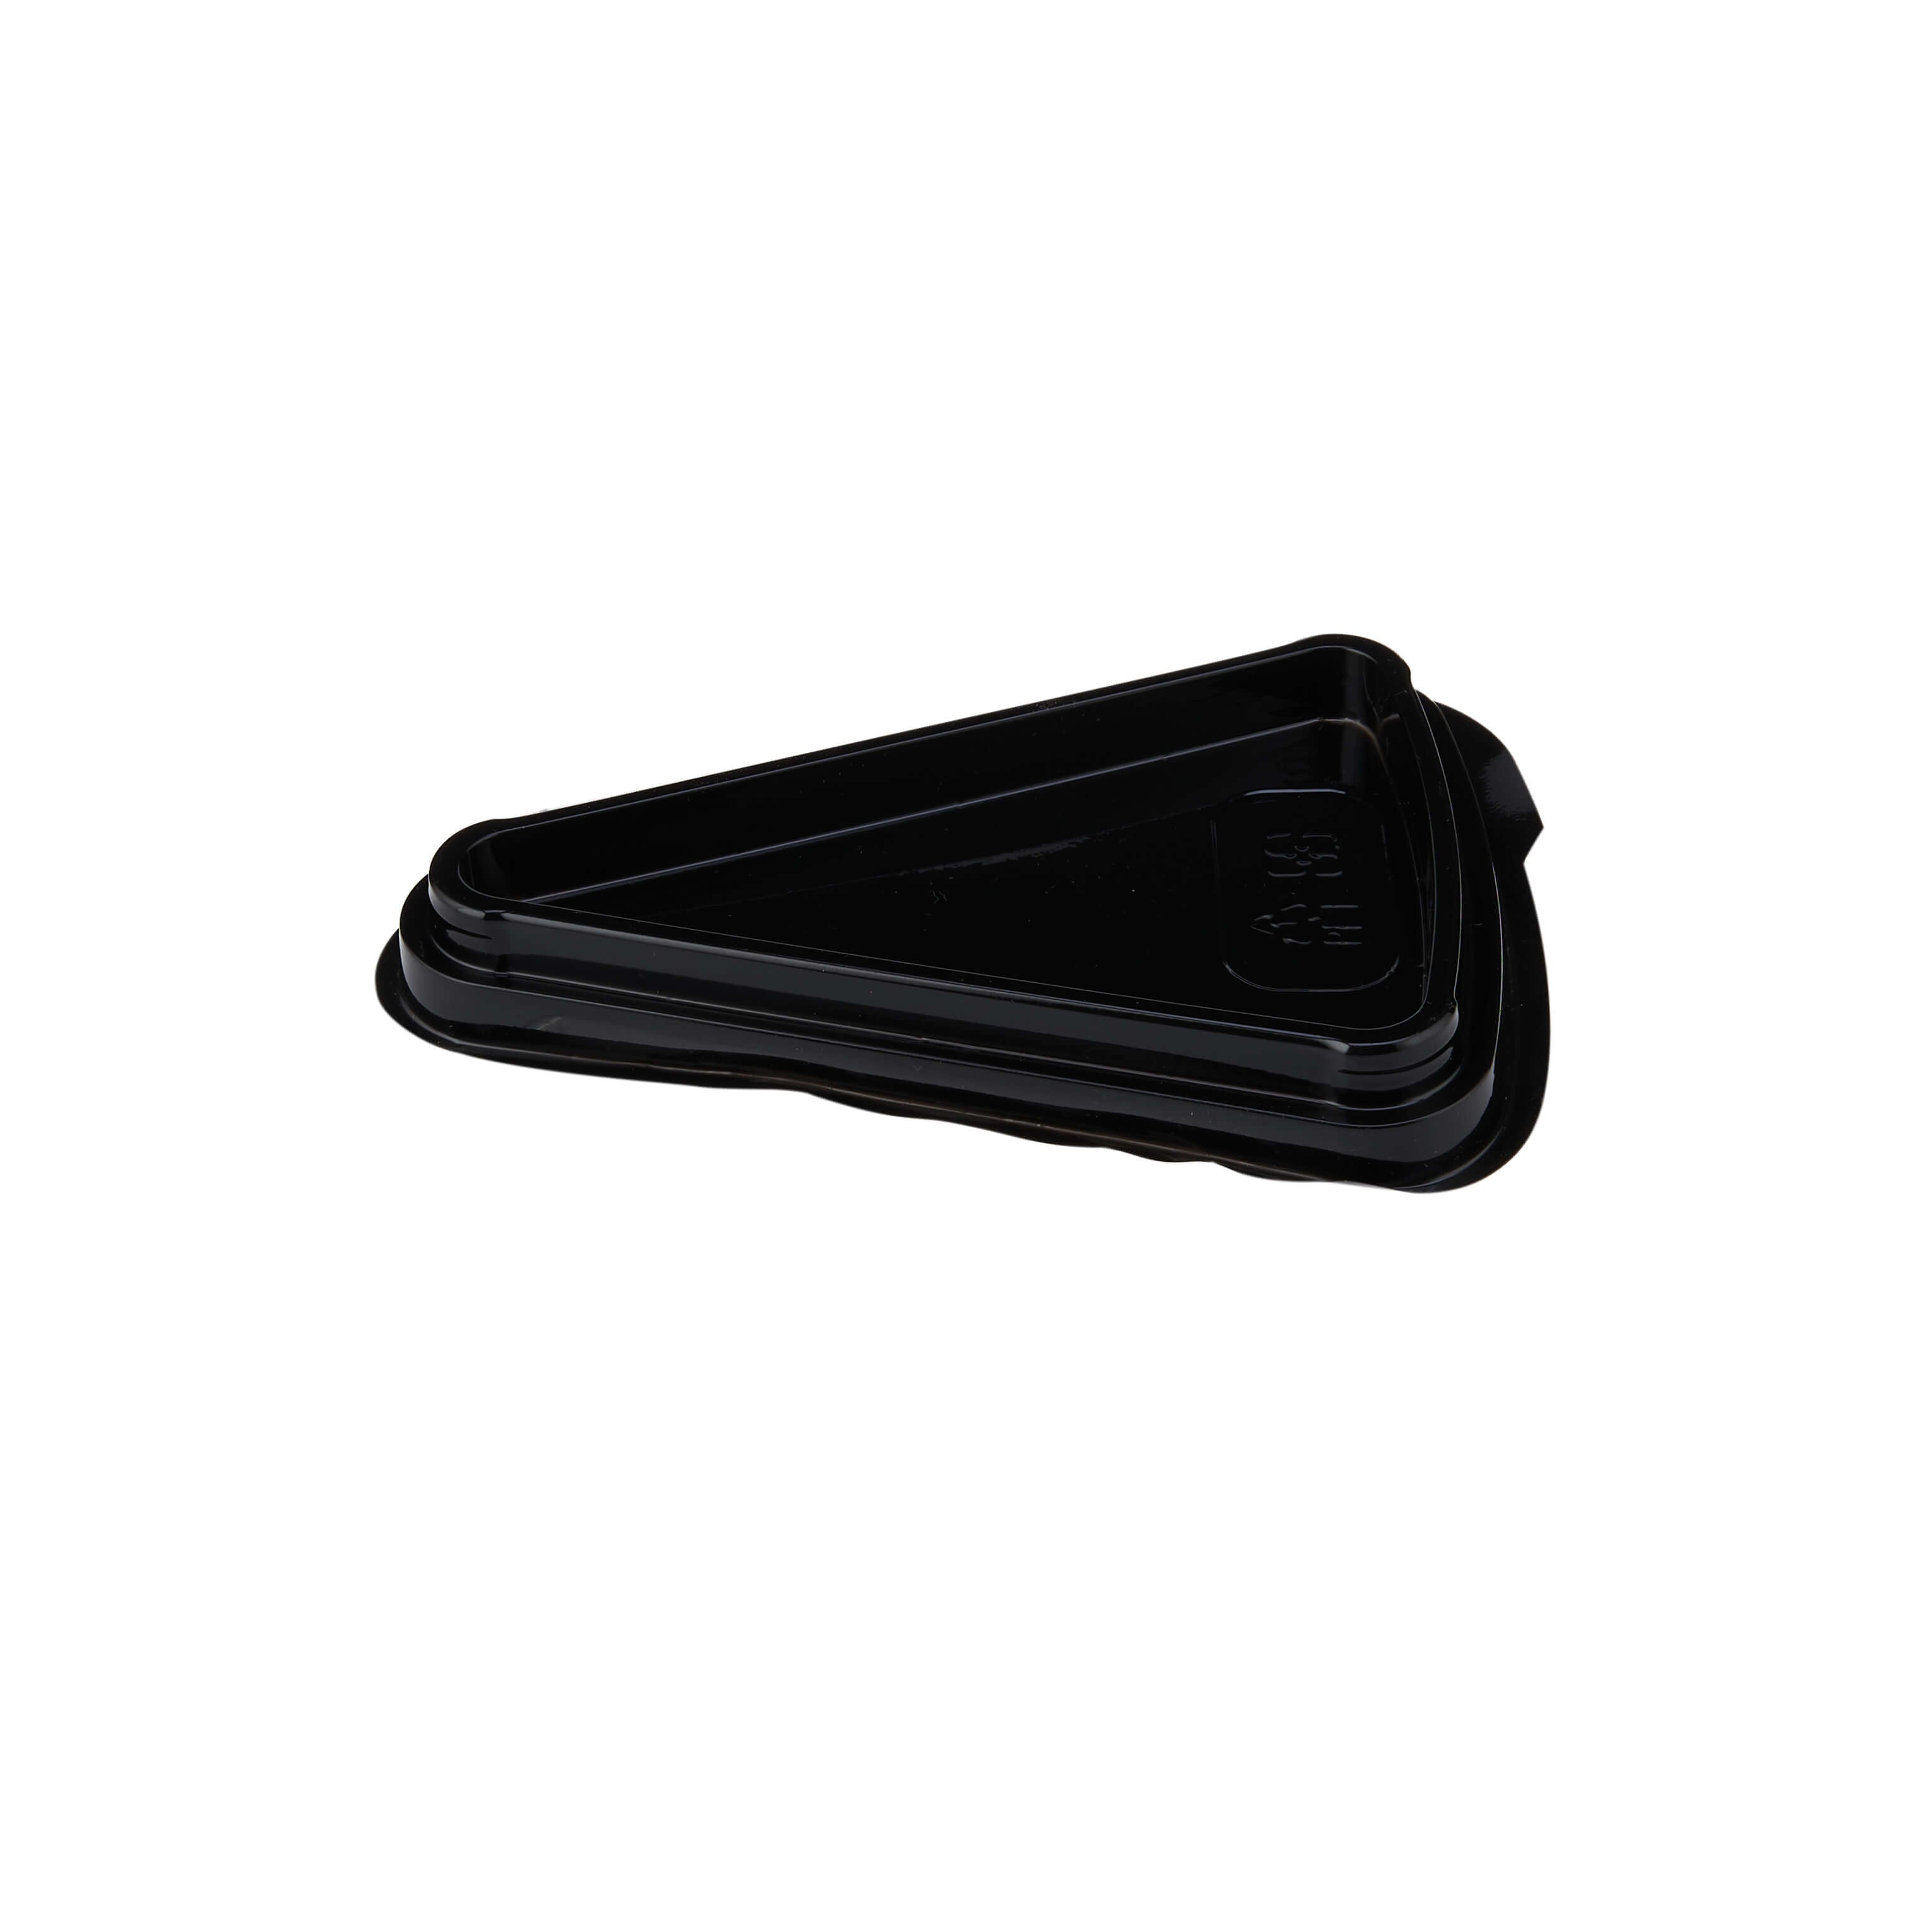 Black base Triangle Cake slice container - Hotpack global